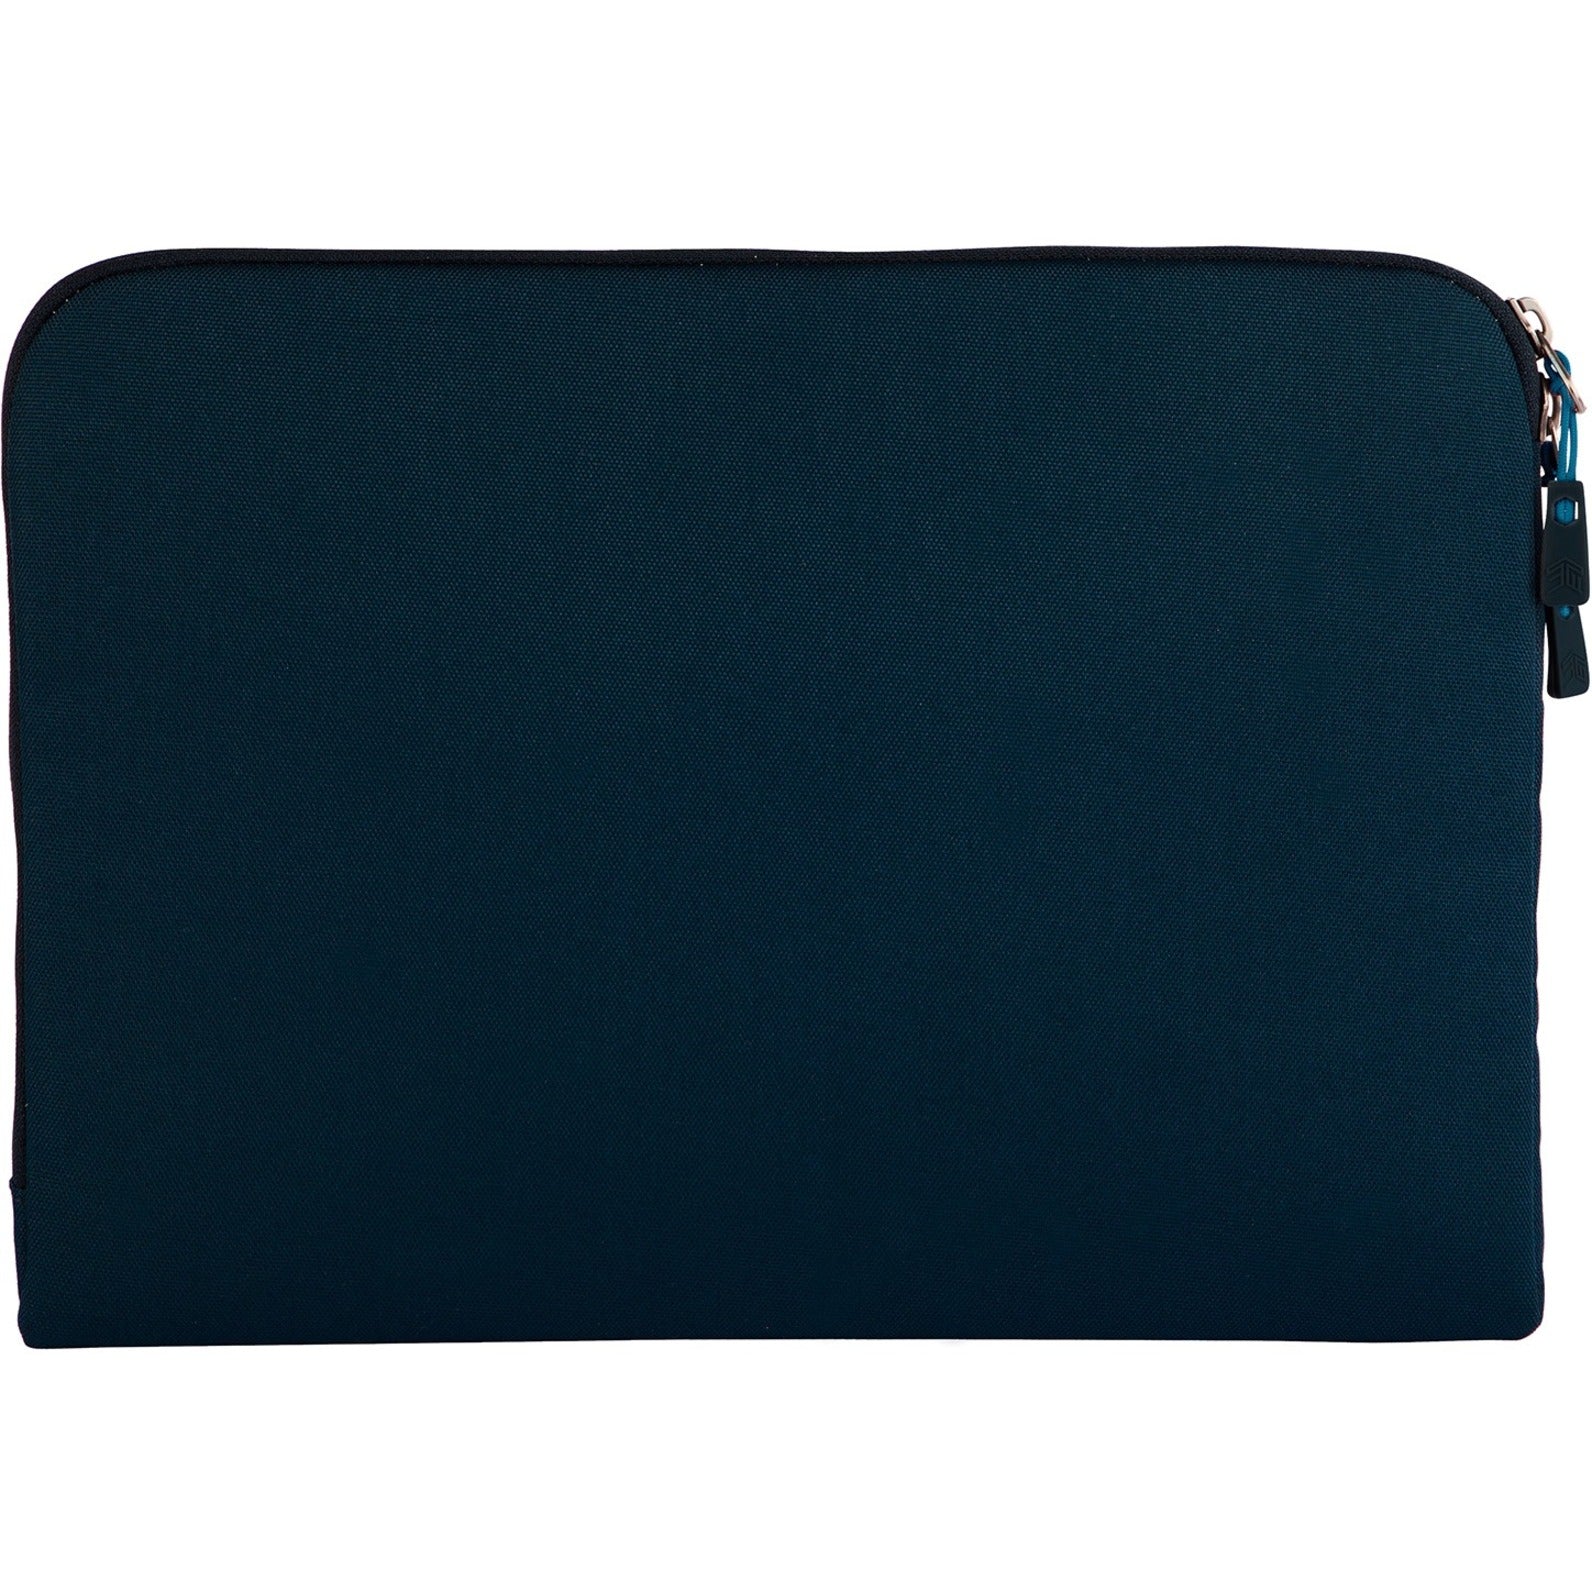 STM Goods STM-114-168P-04 Summary Laptop Sleeve, Durable Zipper Pull, Slim and Light Protective Design, Easy Access to Laptop